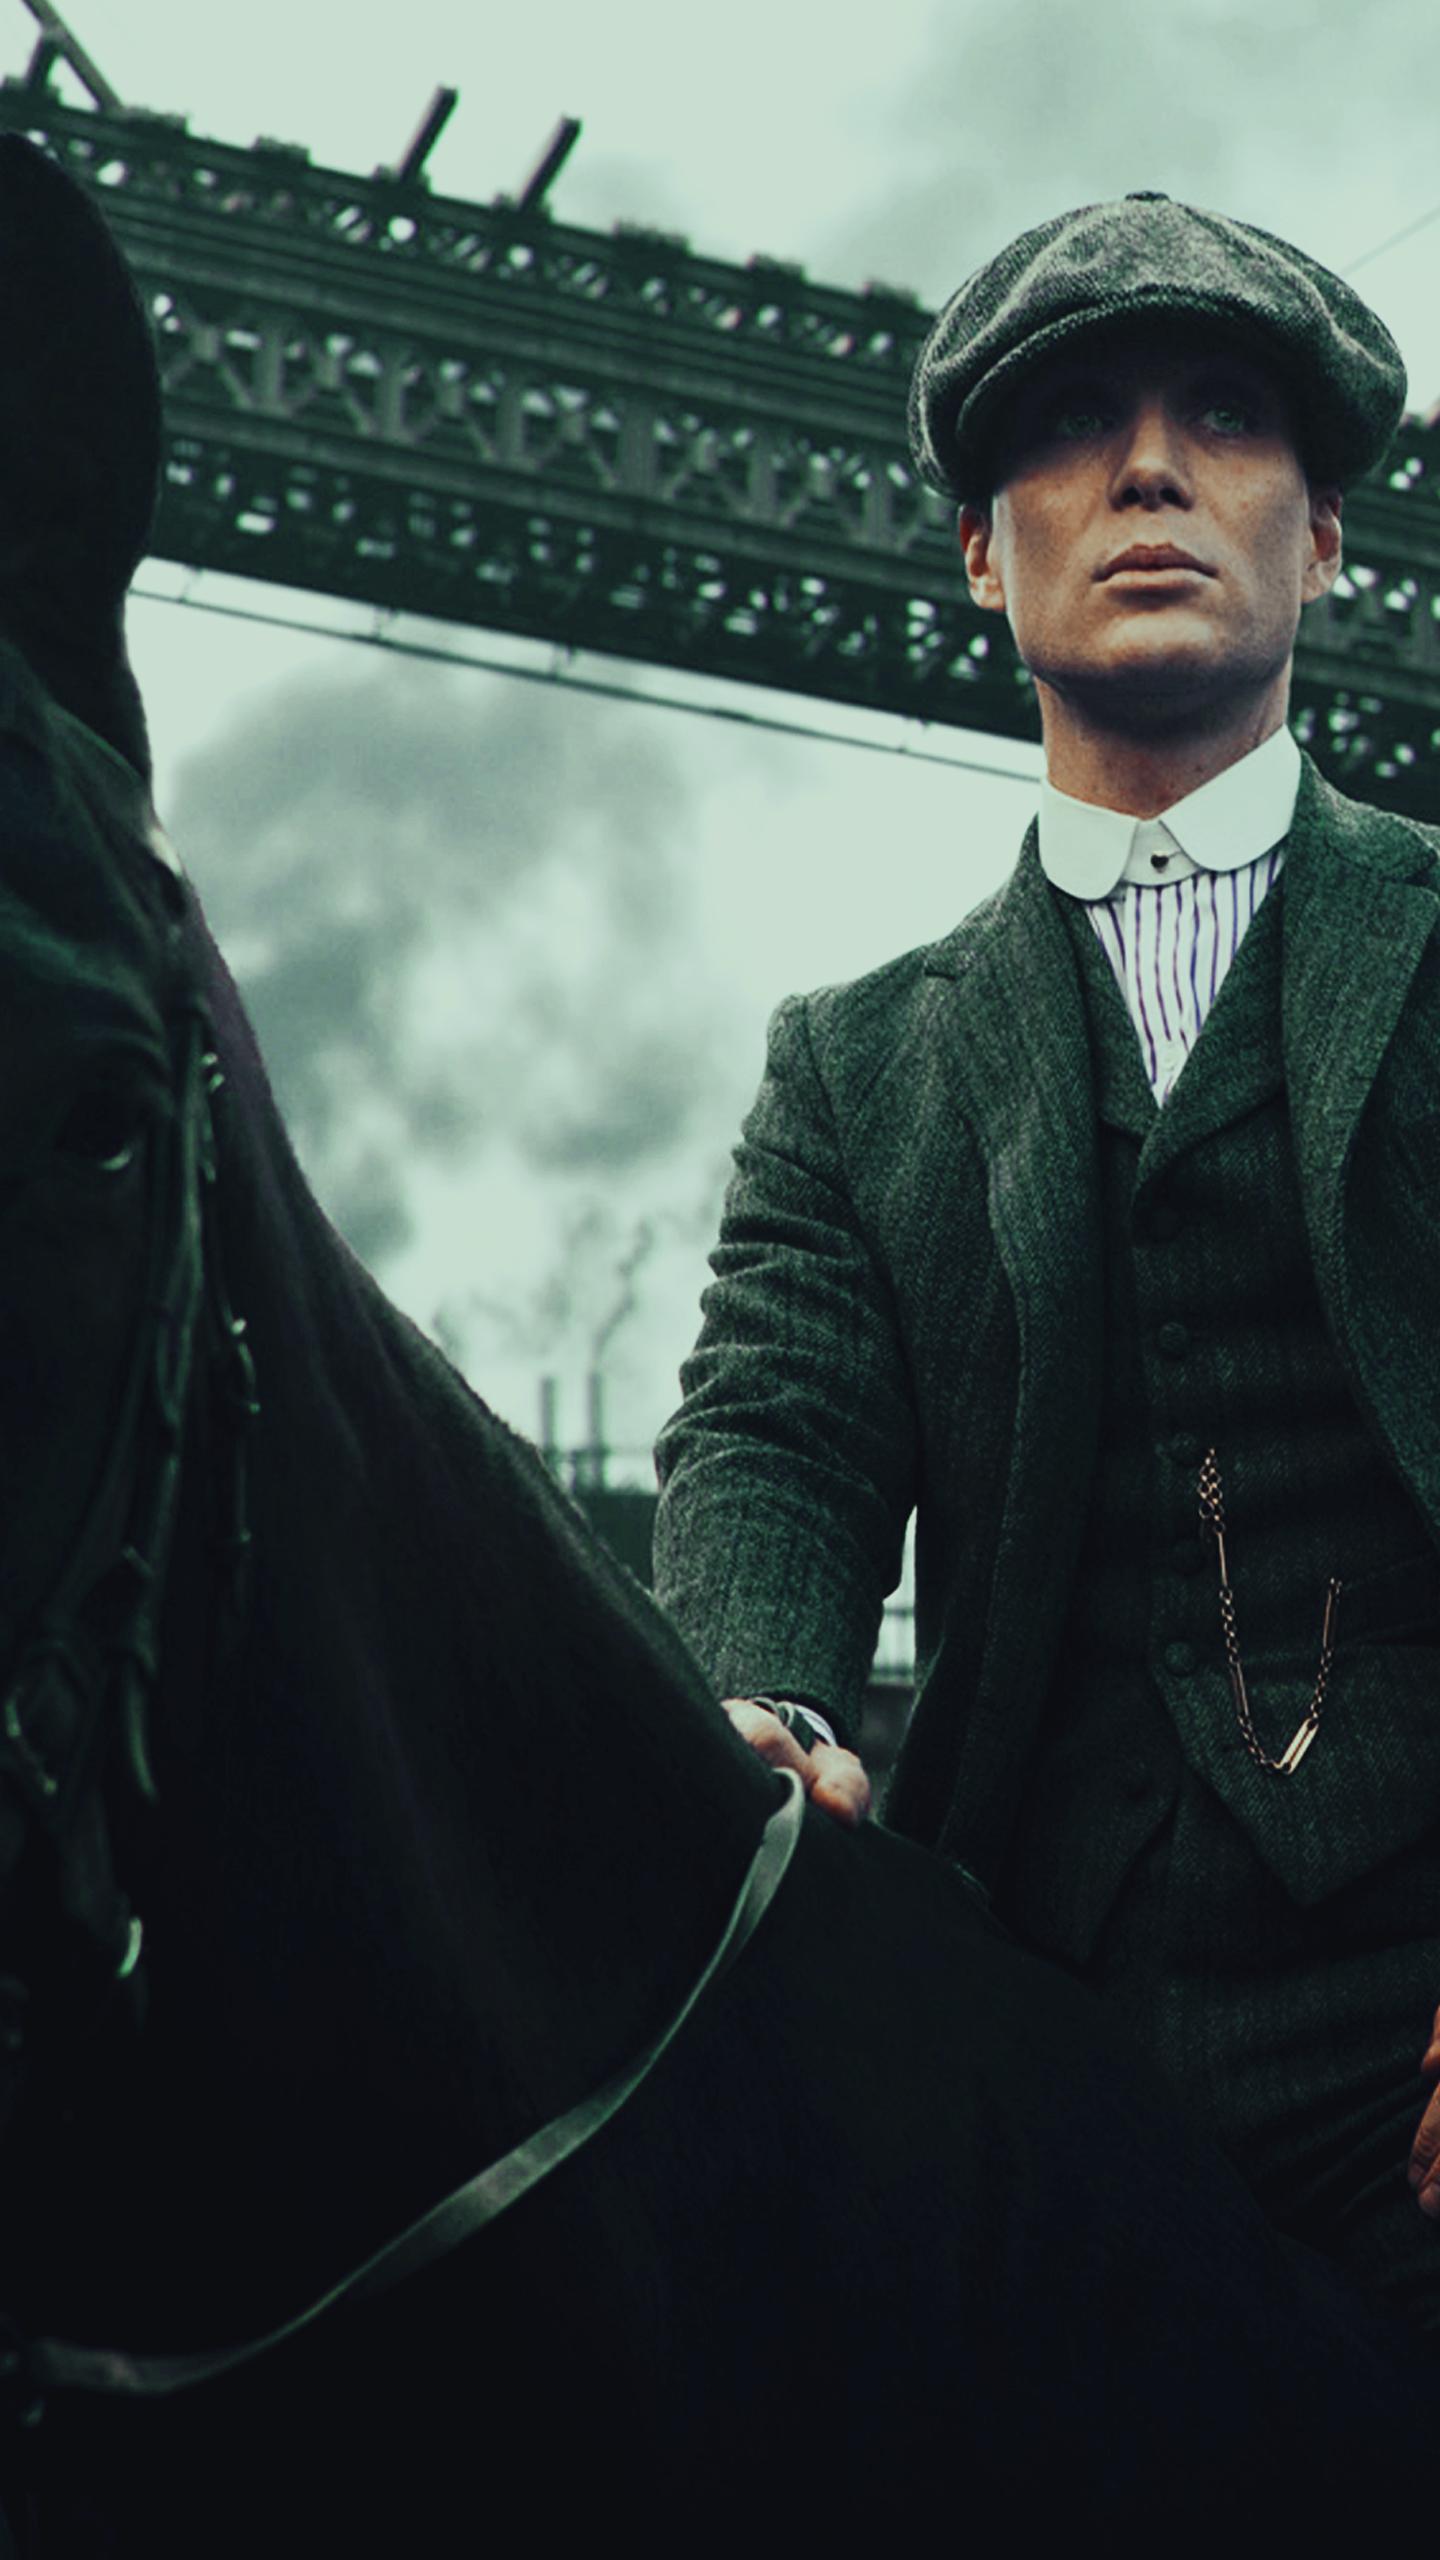 Wallpaper of Peaky Blinders for Android